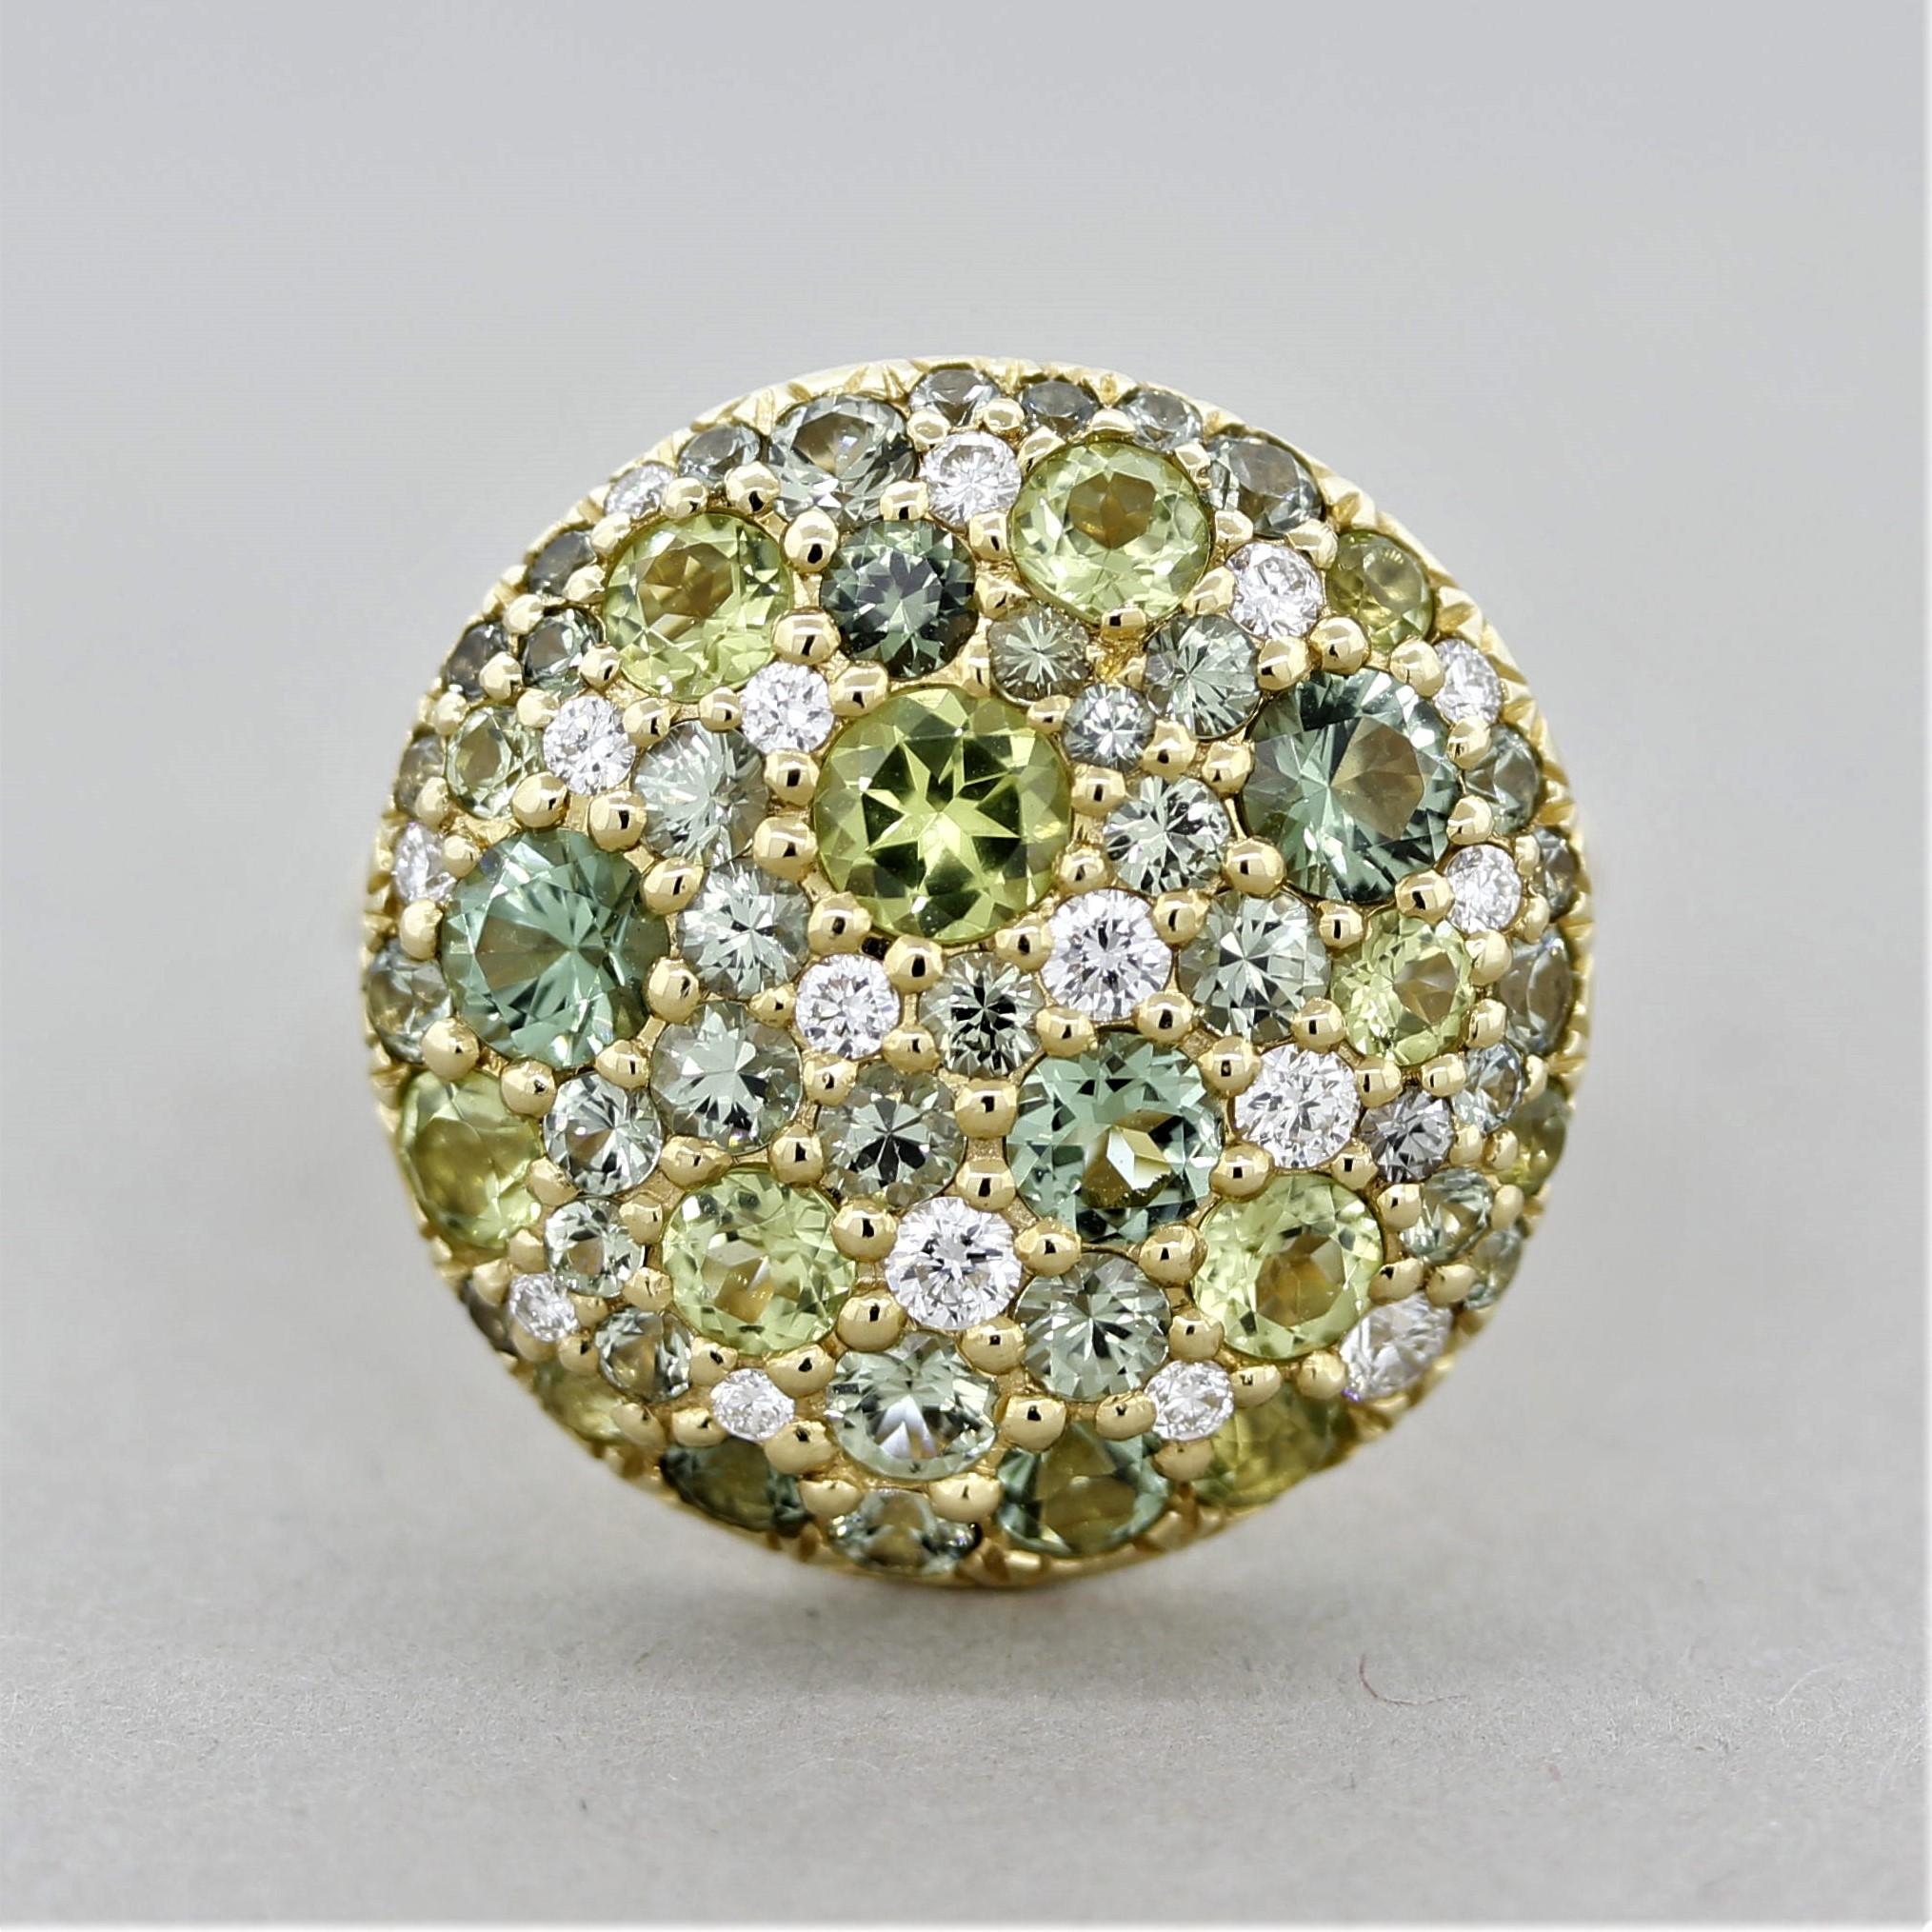 A unique and stylish green ring! It features 3 green gemstones, sapphire, tourmaline and peridot, each with a different shape of green (weights respectively 1.30ctw, 1.22ctw, 0.75ctw). The round-cut green gemstones are accented by bright white